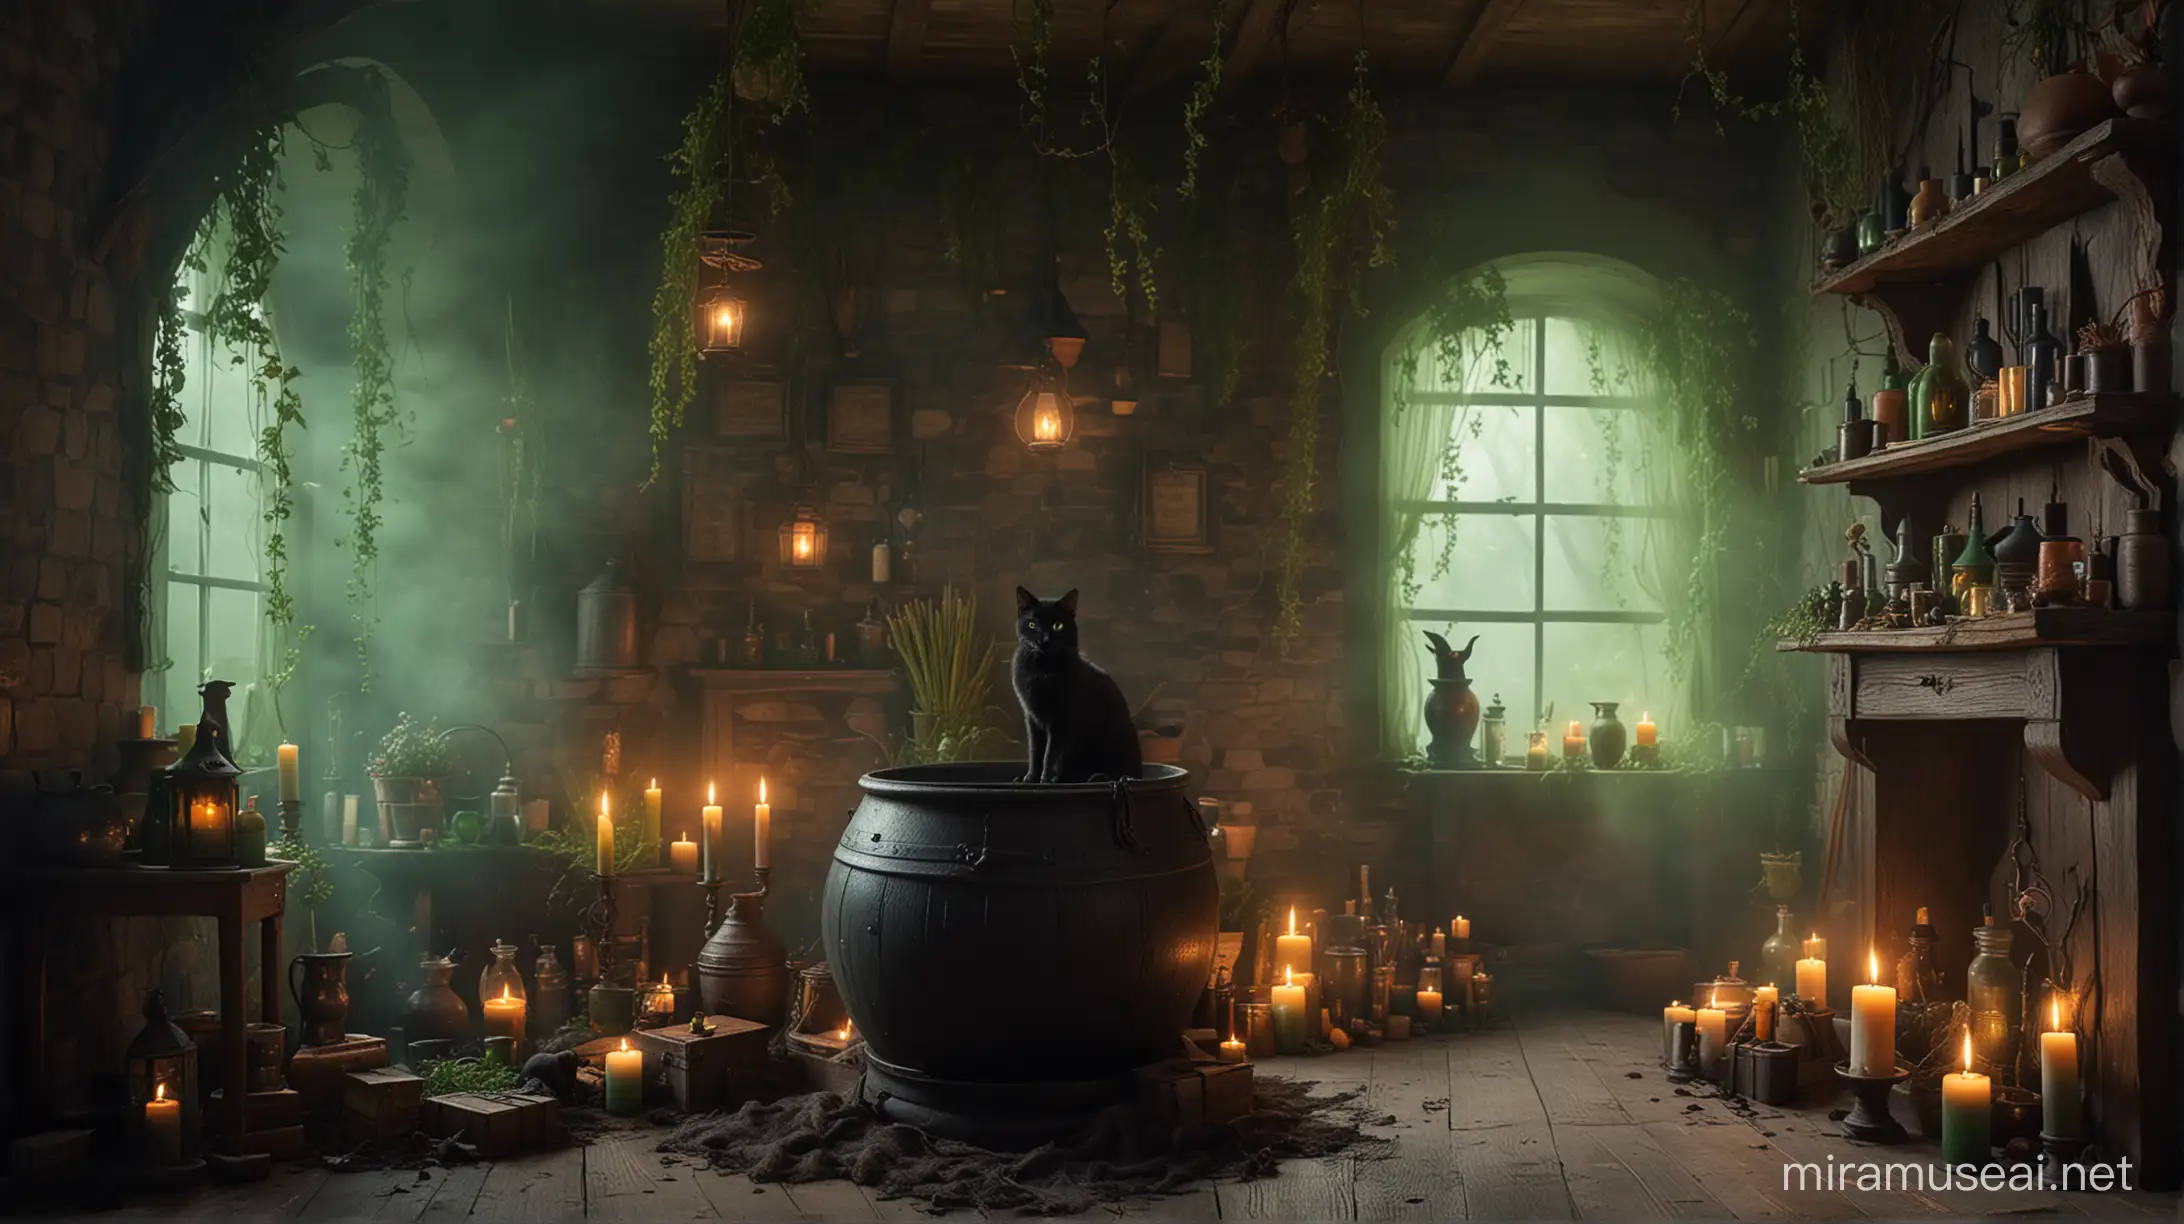 Enchanted Fantasy Witch Room with Cauldron Green Fog Candles and Black Cats